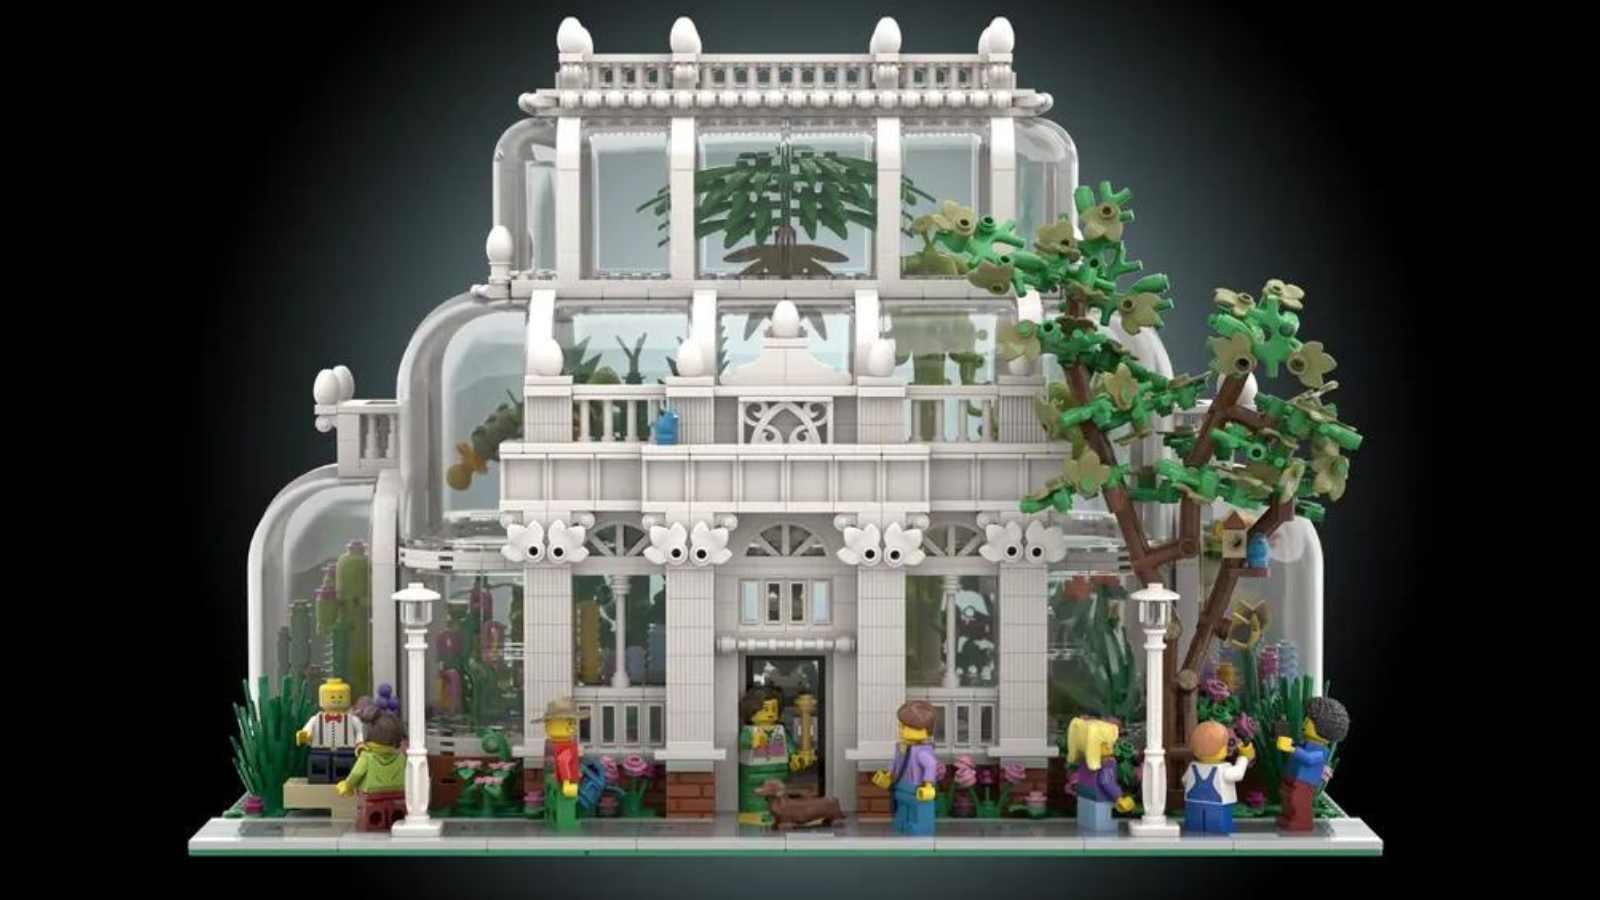 LEGO Botanical Garden to bloom to life after reaching 10,000 votes